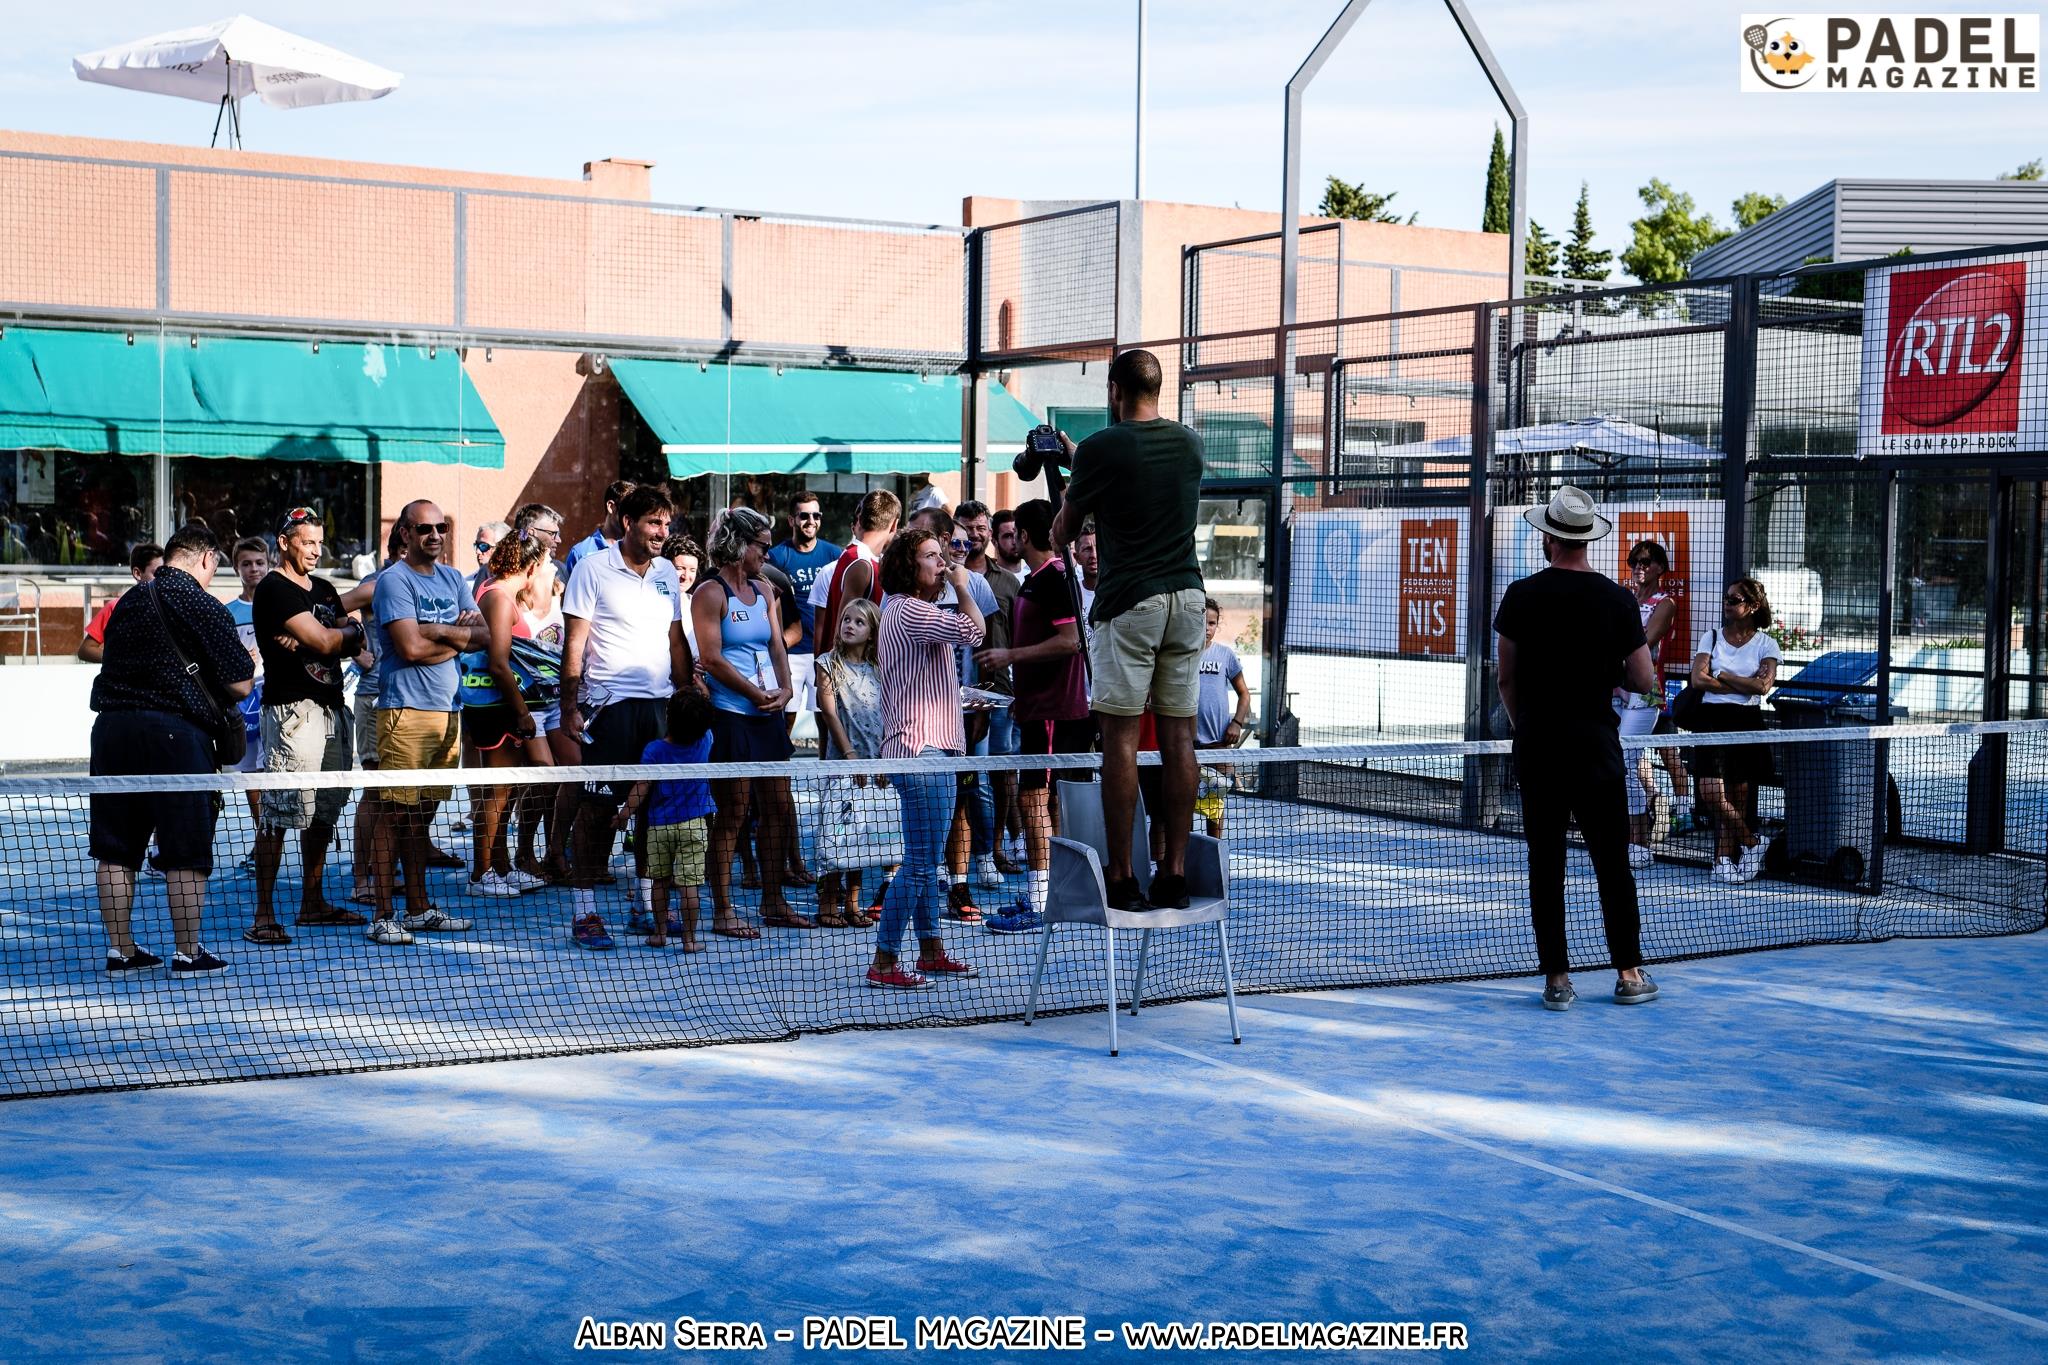 My Padel Tour - Le Mas - Summary of the finals